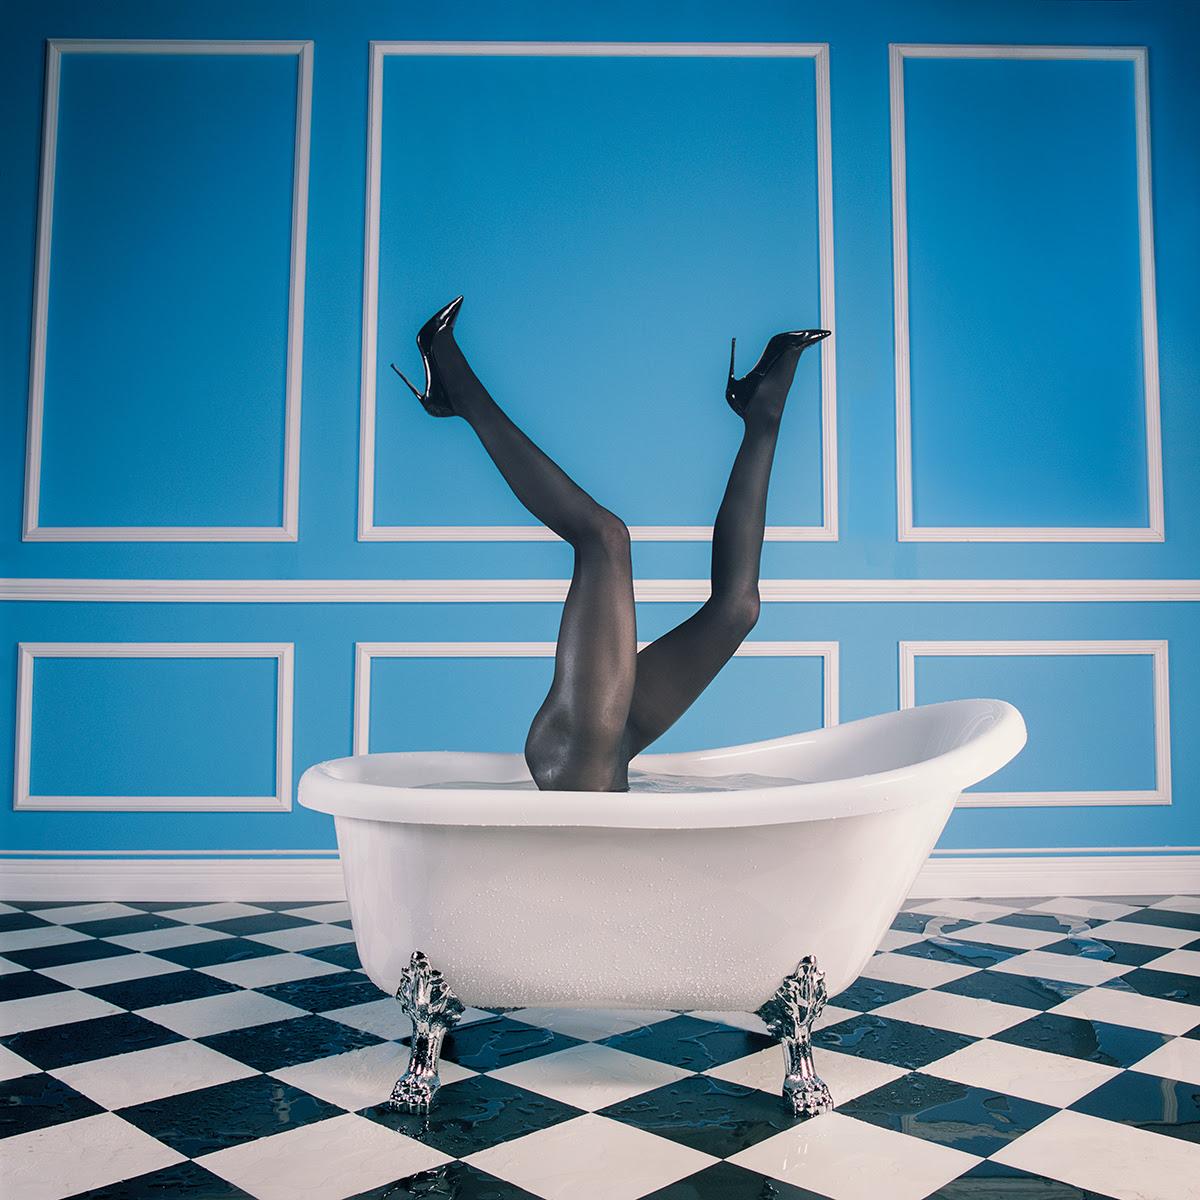 Series: Indulgence
Chromogenic Print on Kodak Endura Luster Paper
All available sizes and editions:
18" x 18"
30" x 30"
45" x 45"
60" x 60"
70" x 70"
Editions of 3 + 2 Artist Proofs

Tyler Shields is a photographer, film director, and writer, best